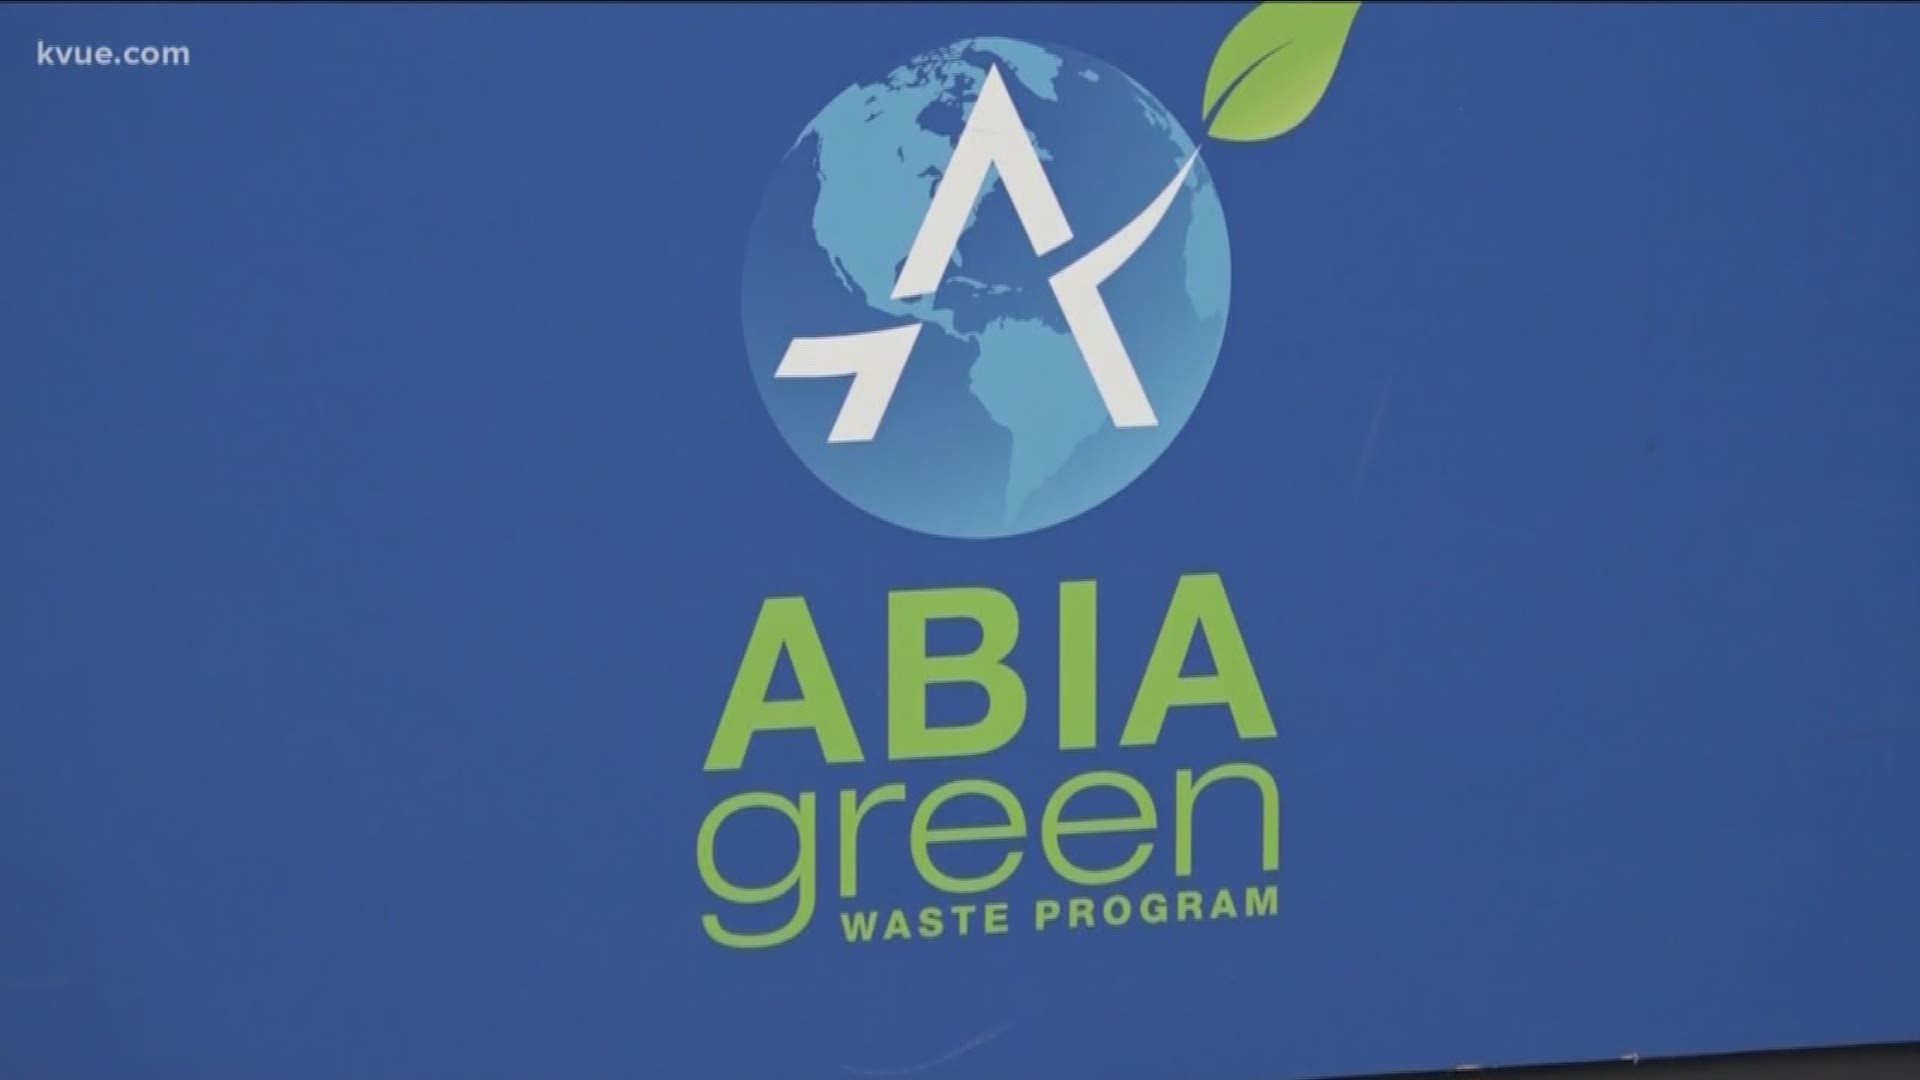 Austin-Bergstrom International Airport staff said they work hard to express the values of Austin by taking sustainability seriously.